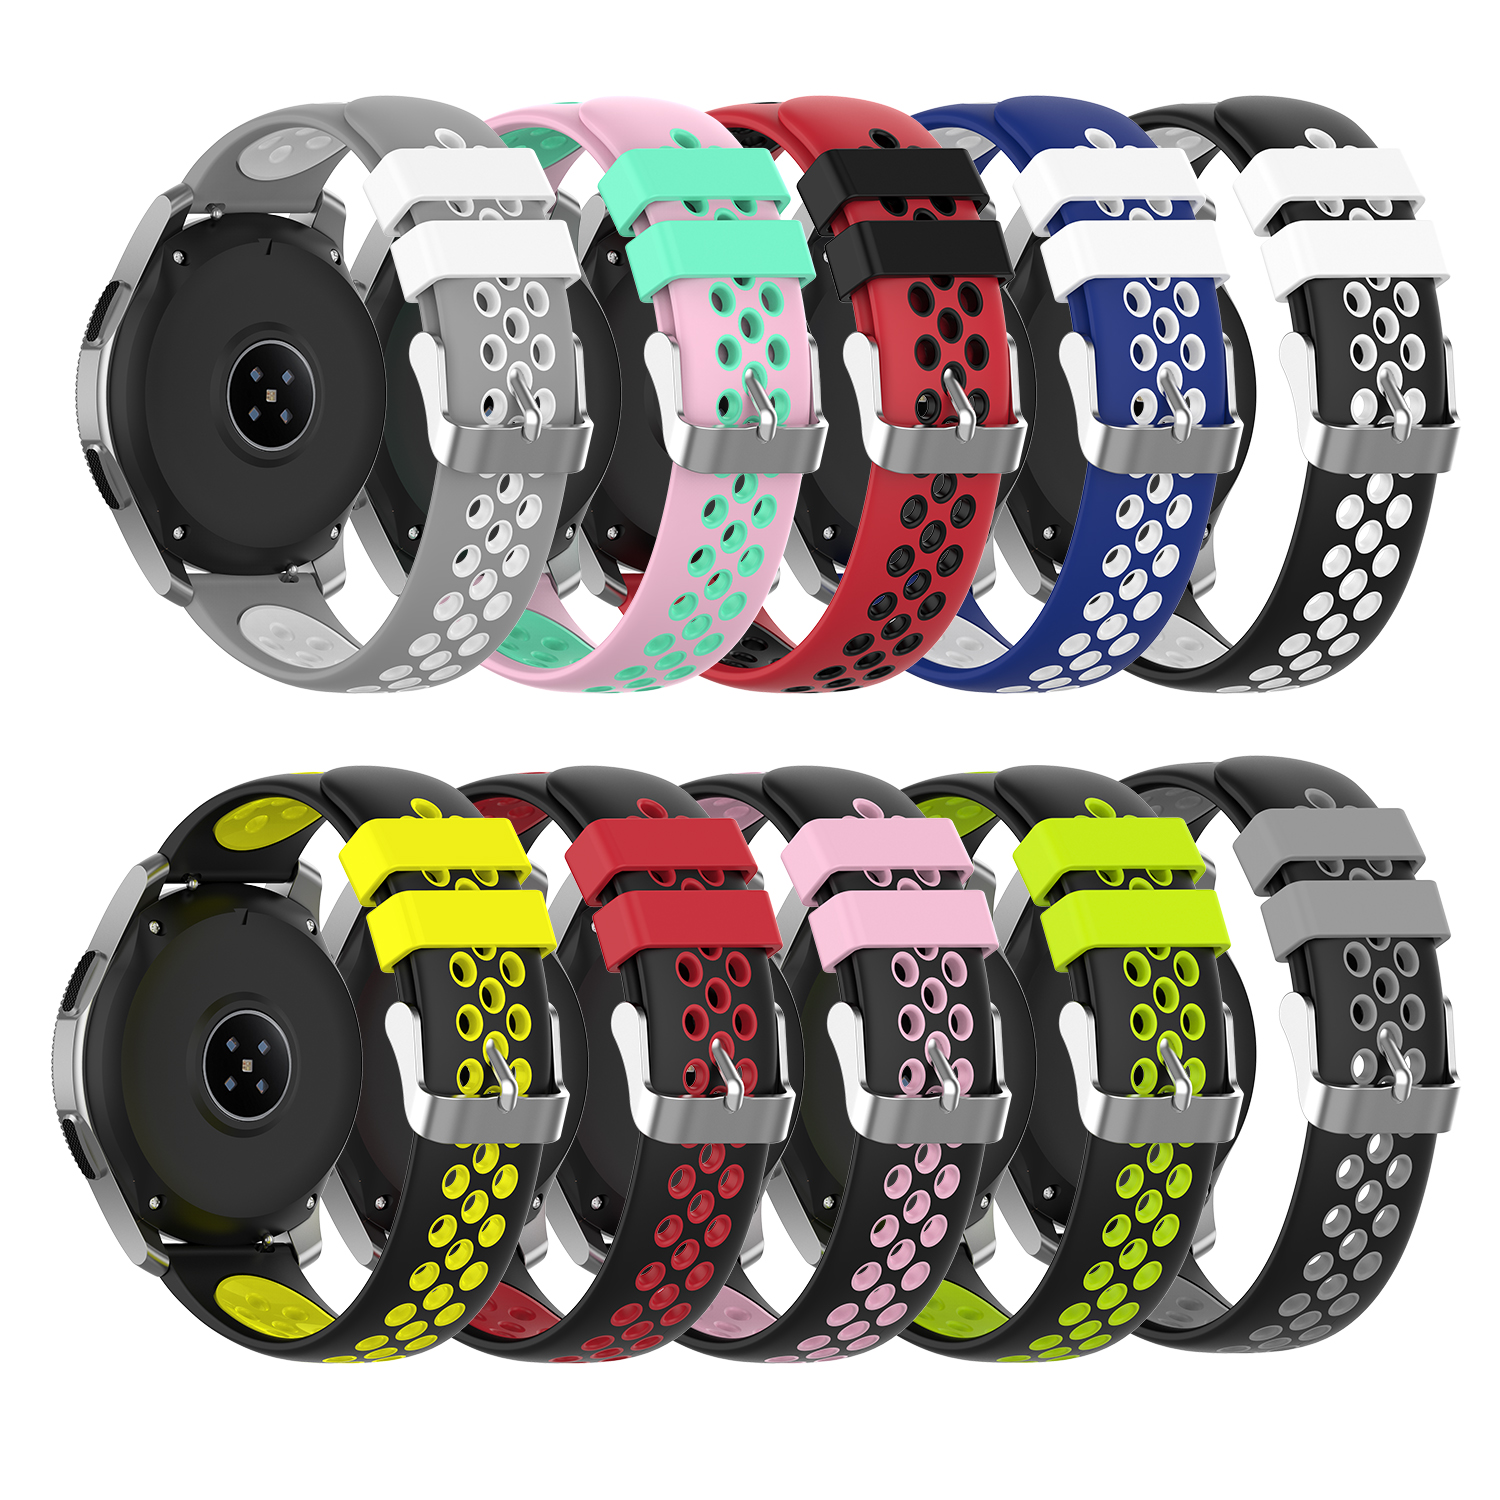 Bakeey-Two-color-Breathable-Waterproof-Replacement-Strap-Smart-Watch-Band-For-Samsung-Galaxy-Watch-4-1814097-2